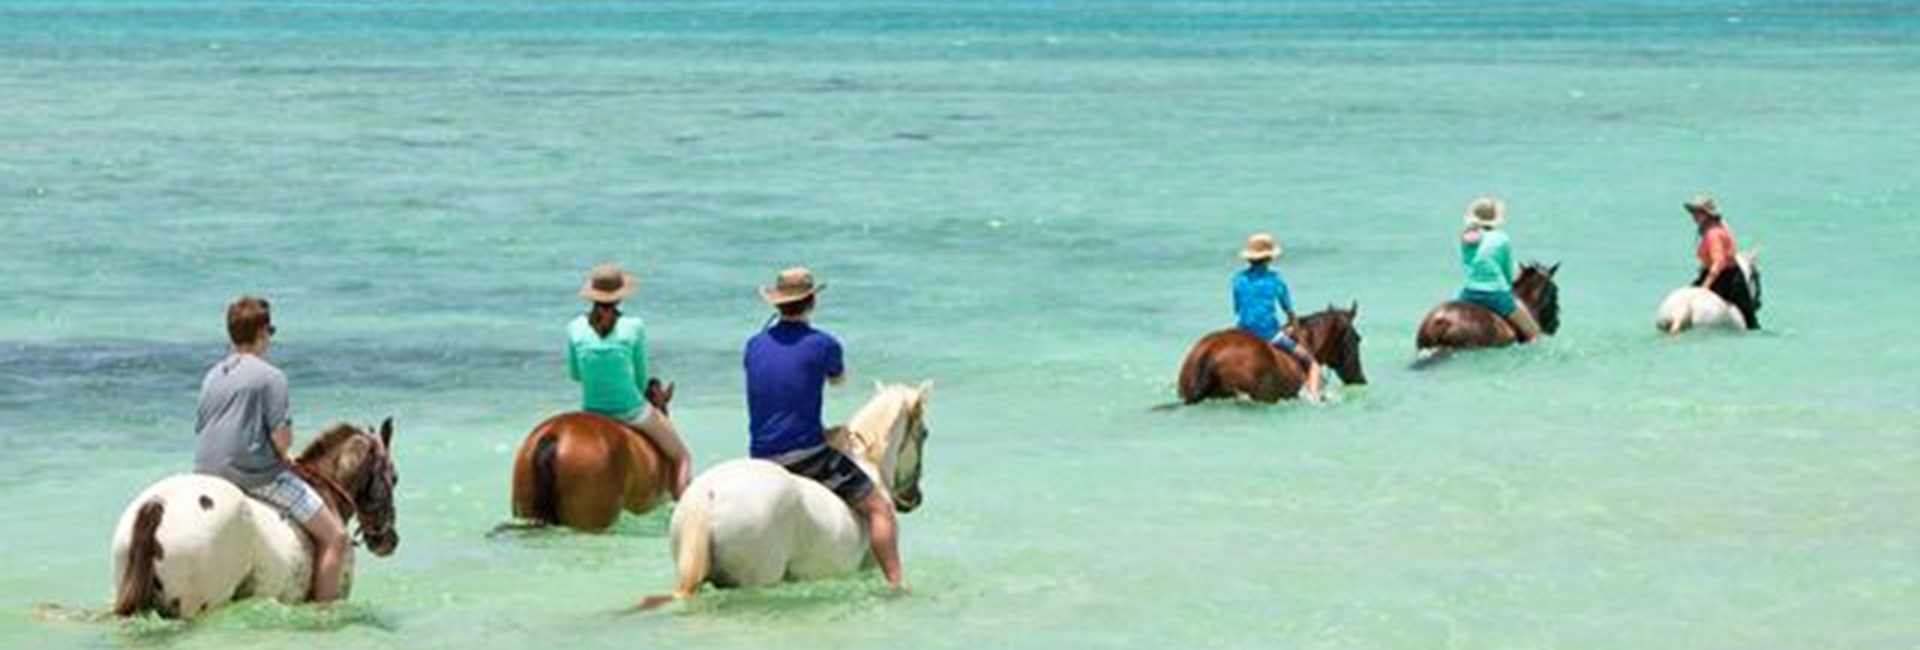 group horse riding in Caribbean sea